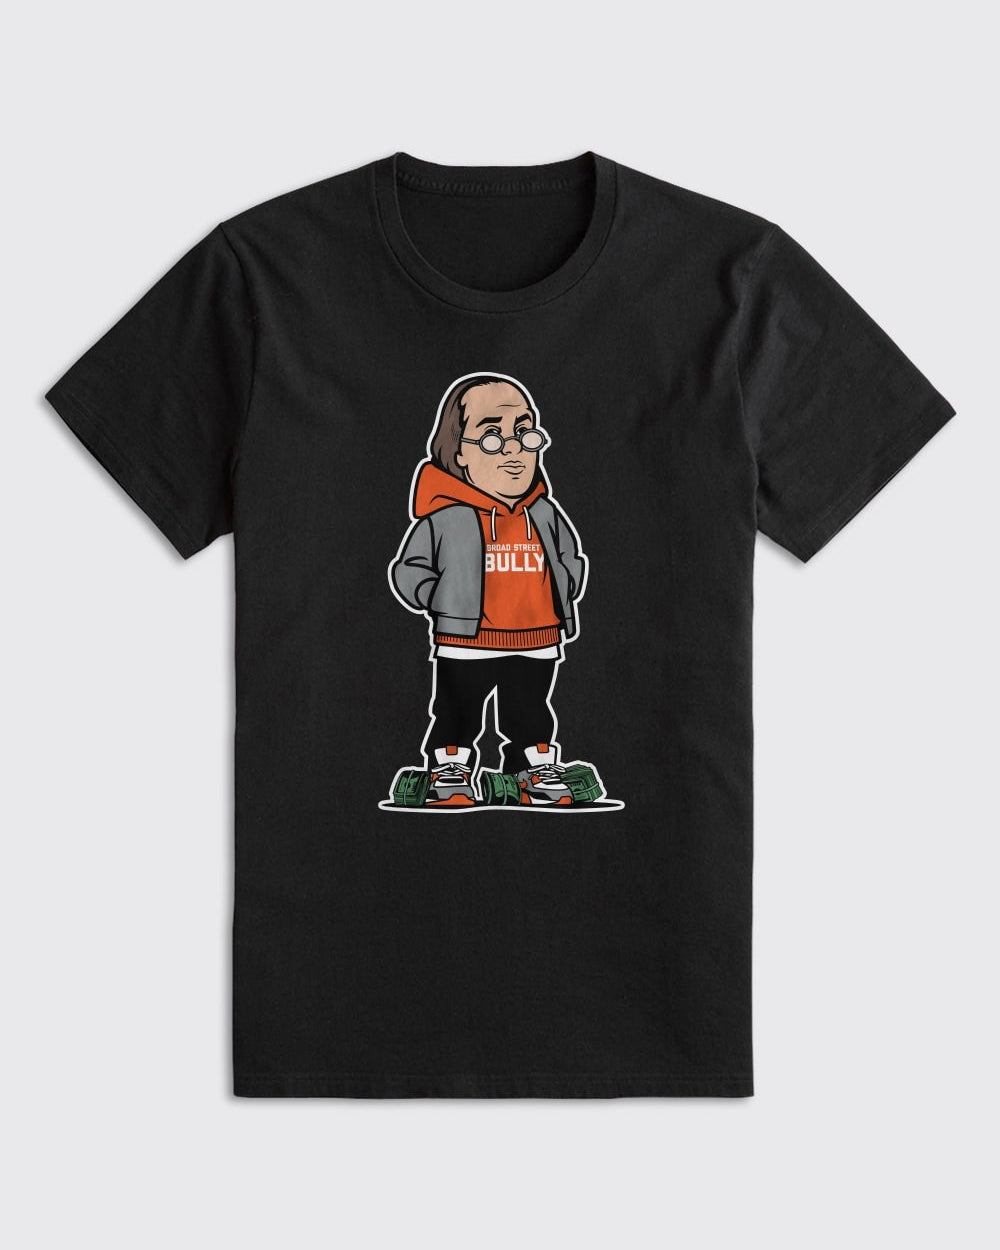 Ben Franklin Flyers Shirt - Flyers, T-Shirts - Philly Sports Shirts